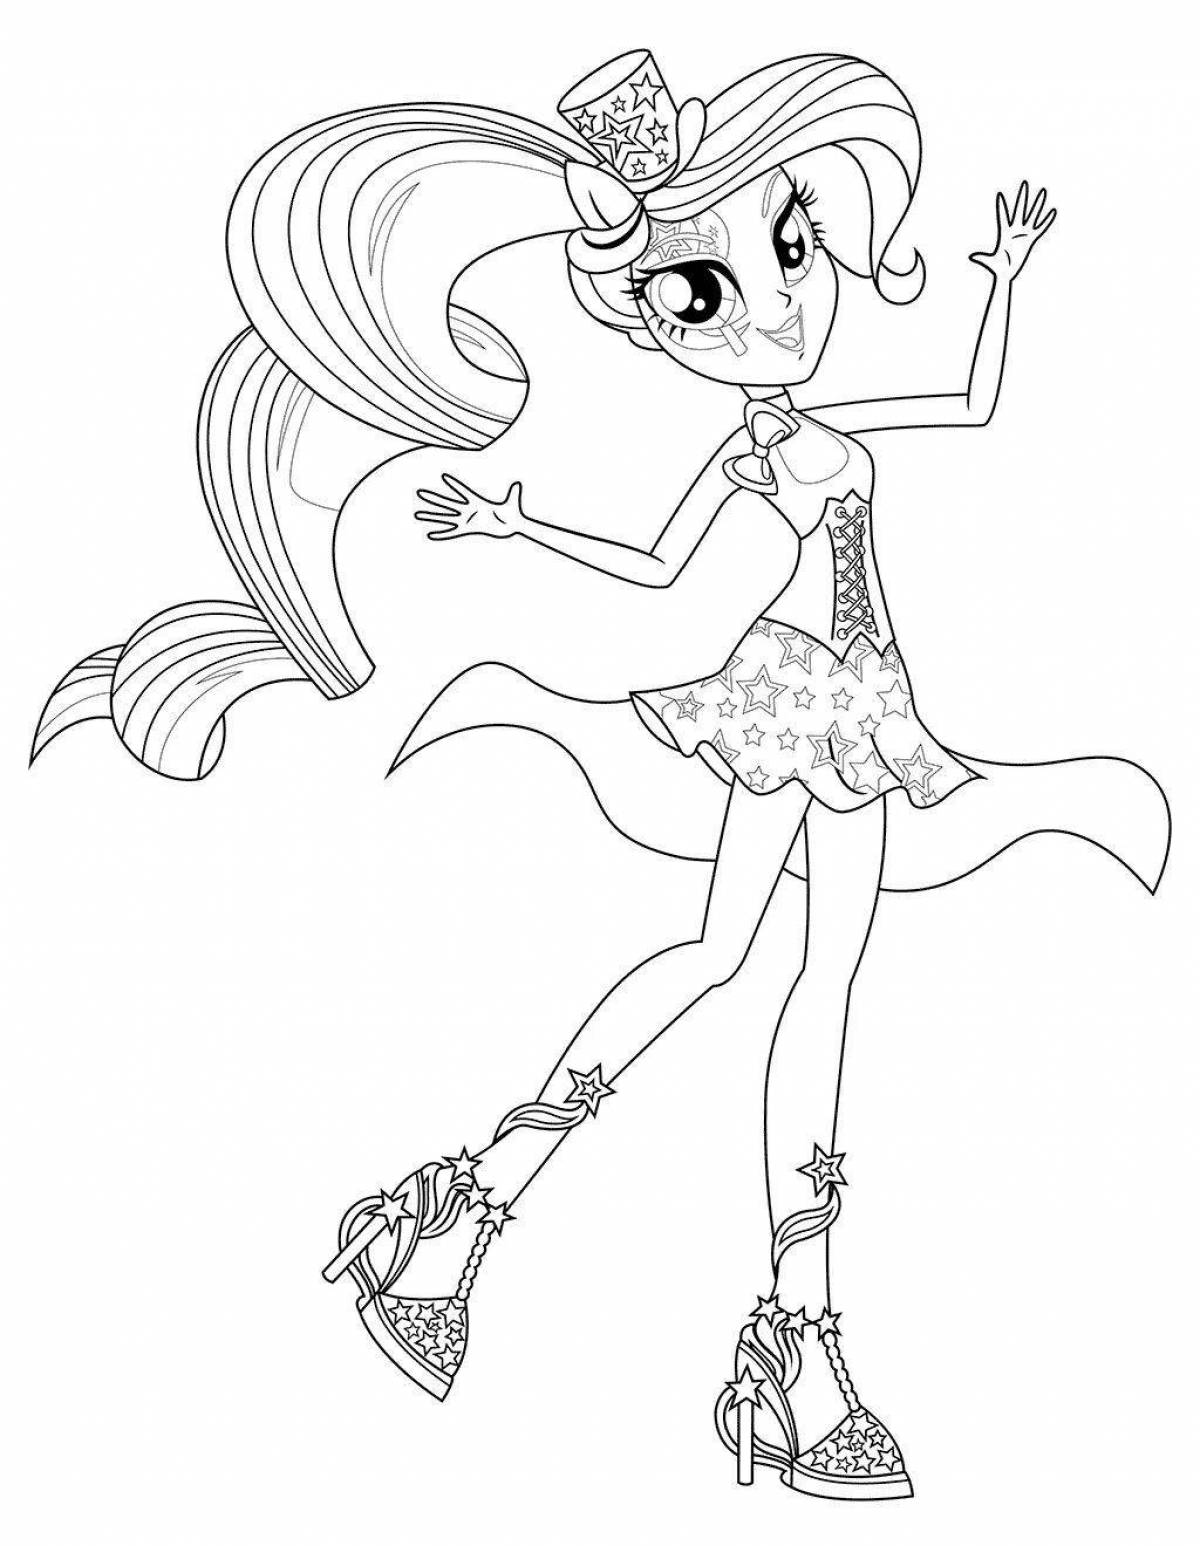 Delightful coloring my little pony equestria girls